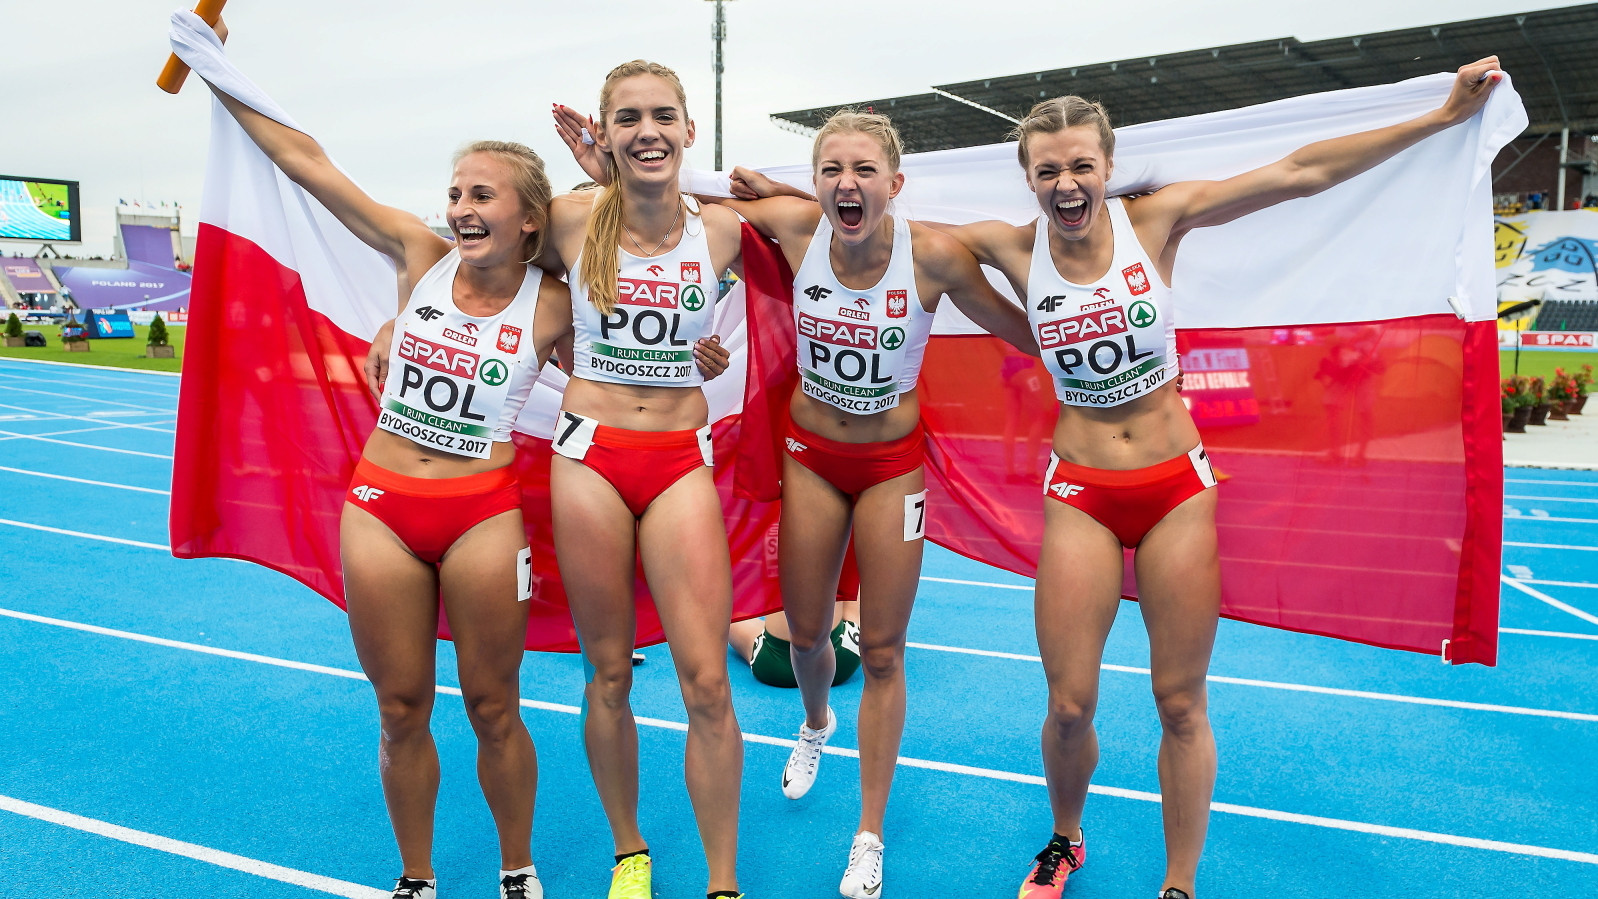 Polish 4x400m Runners Are Looking Very Good After Winning Gold Meda